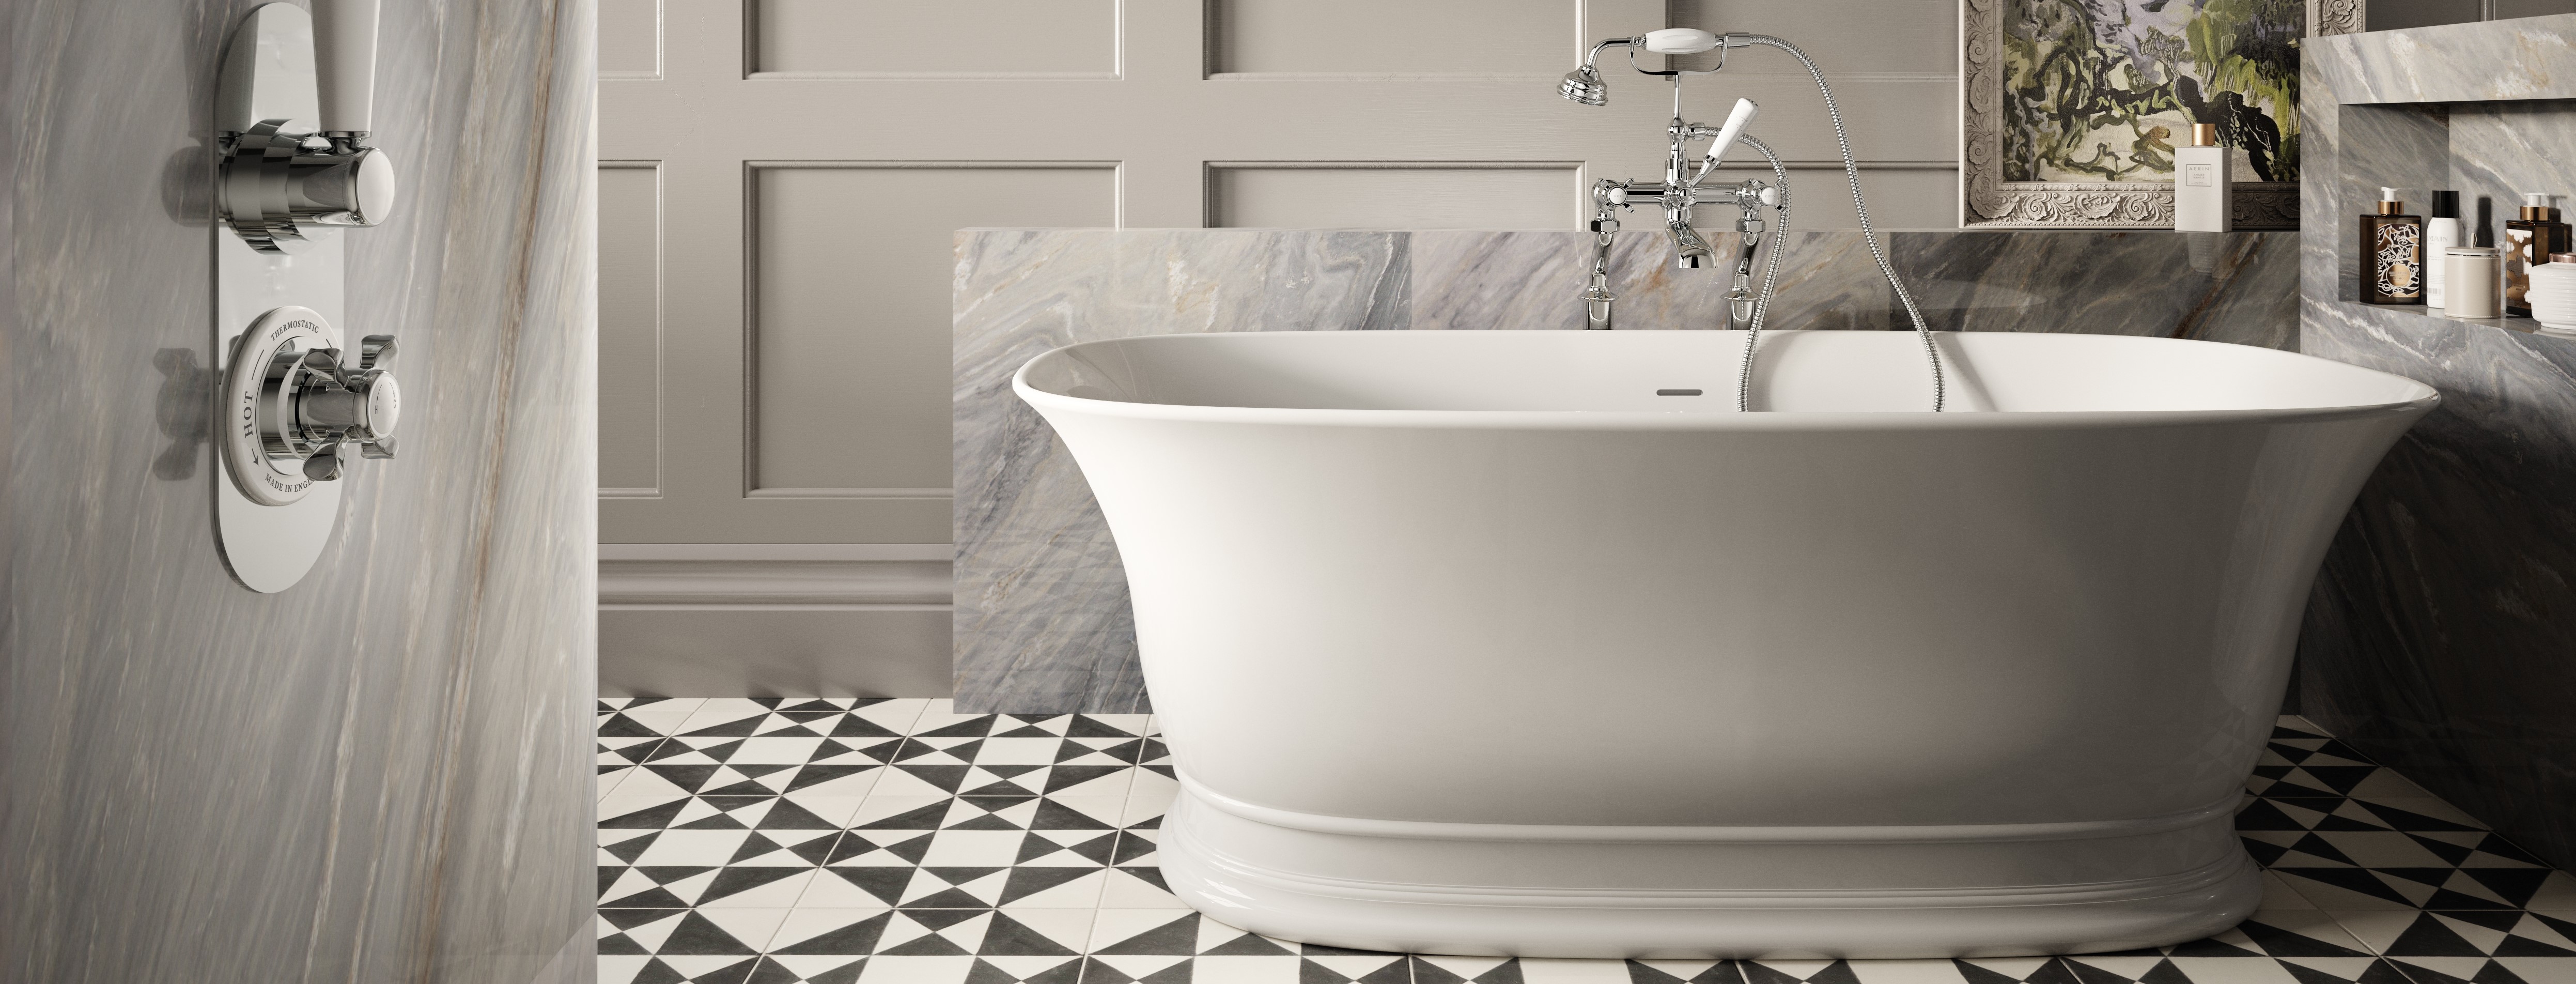 7 Small Traditional Bathroom Ideas and How to Achieve Them